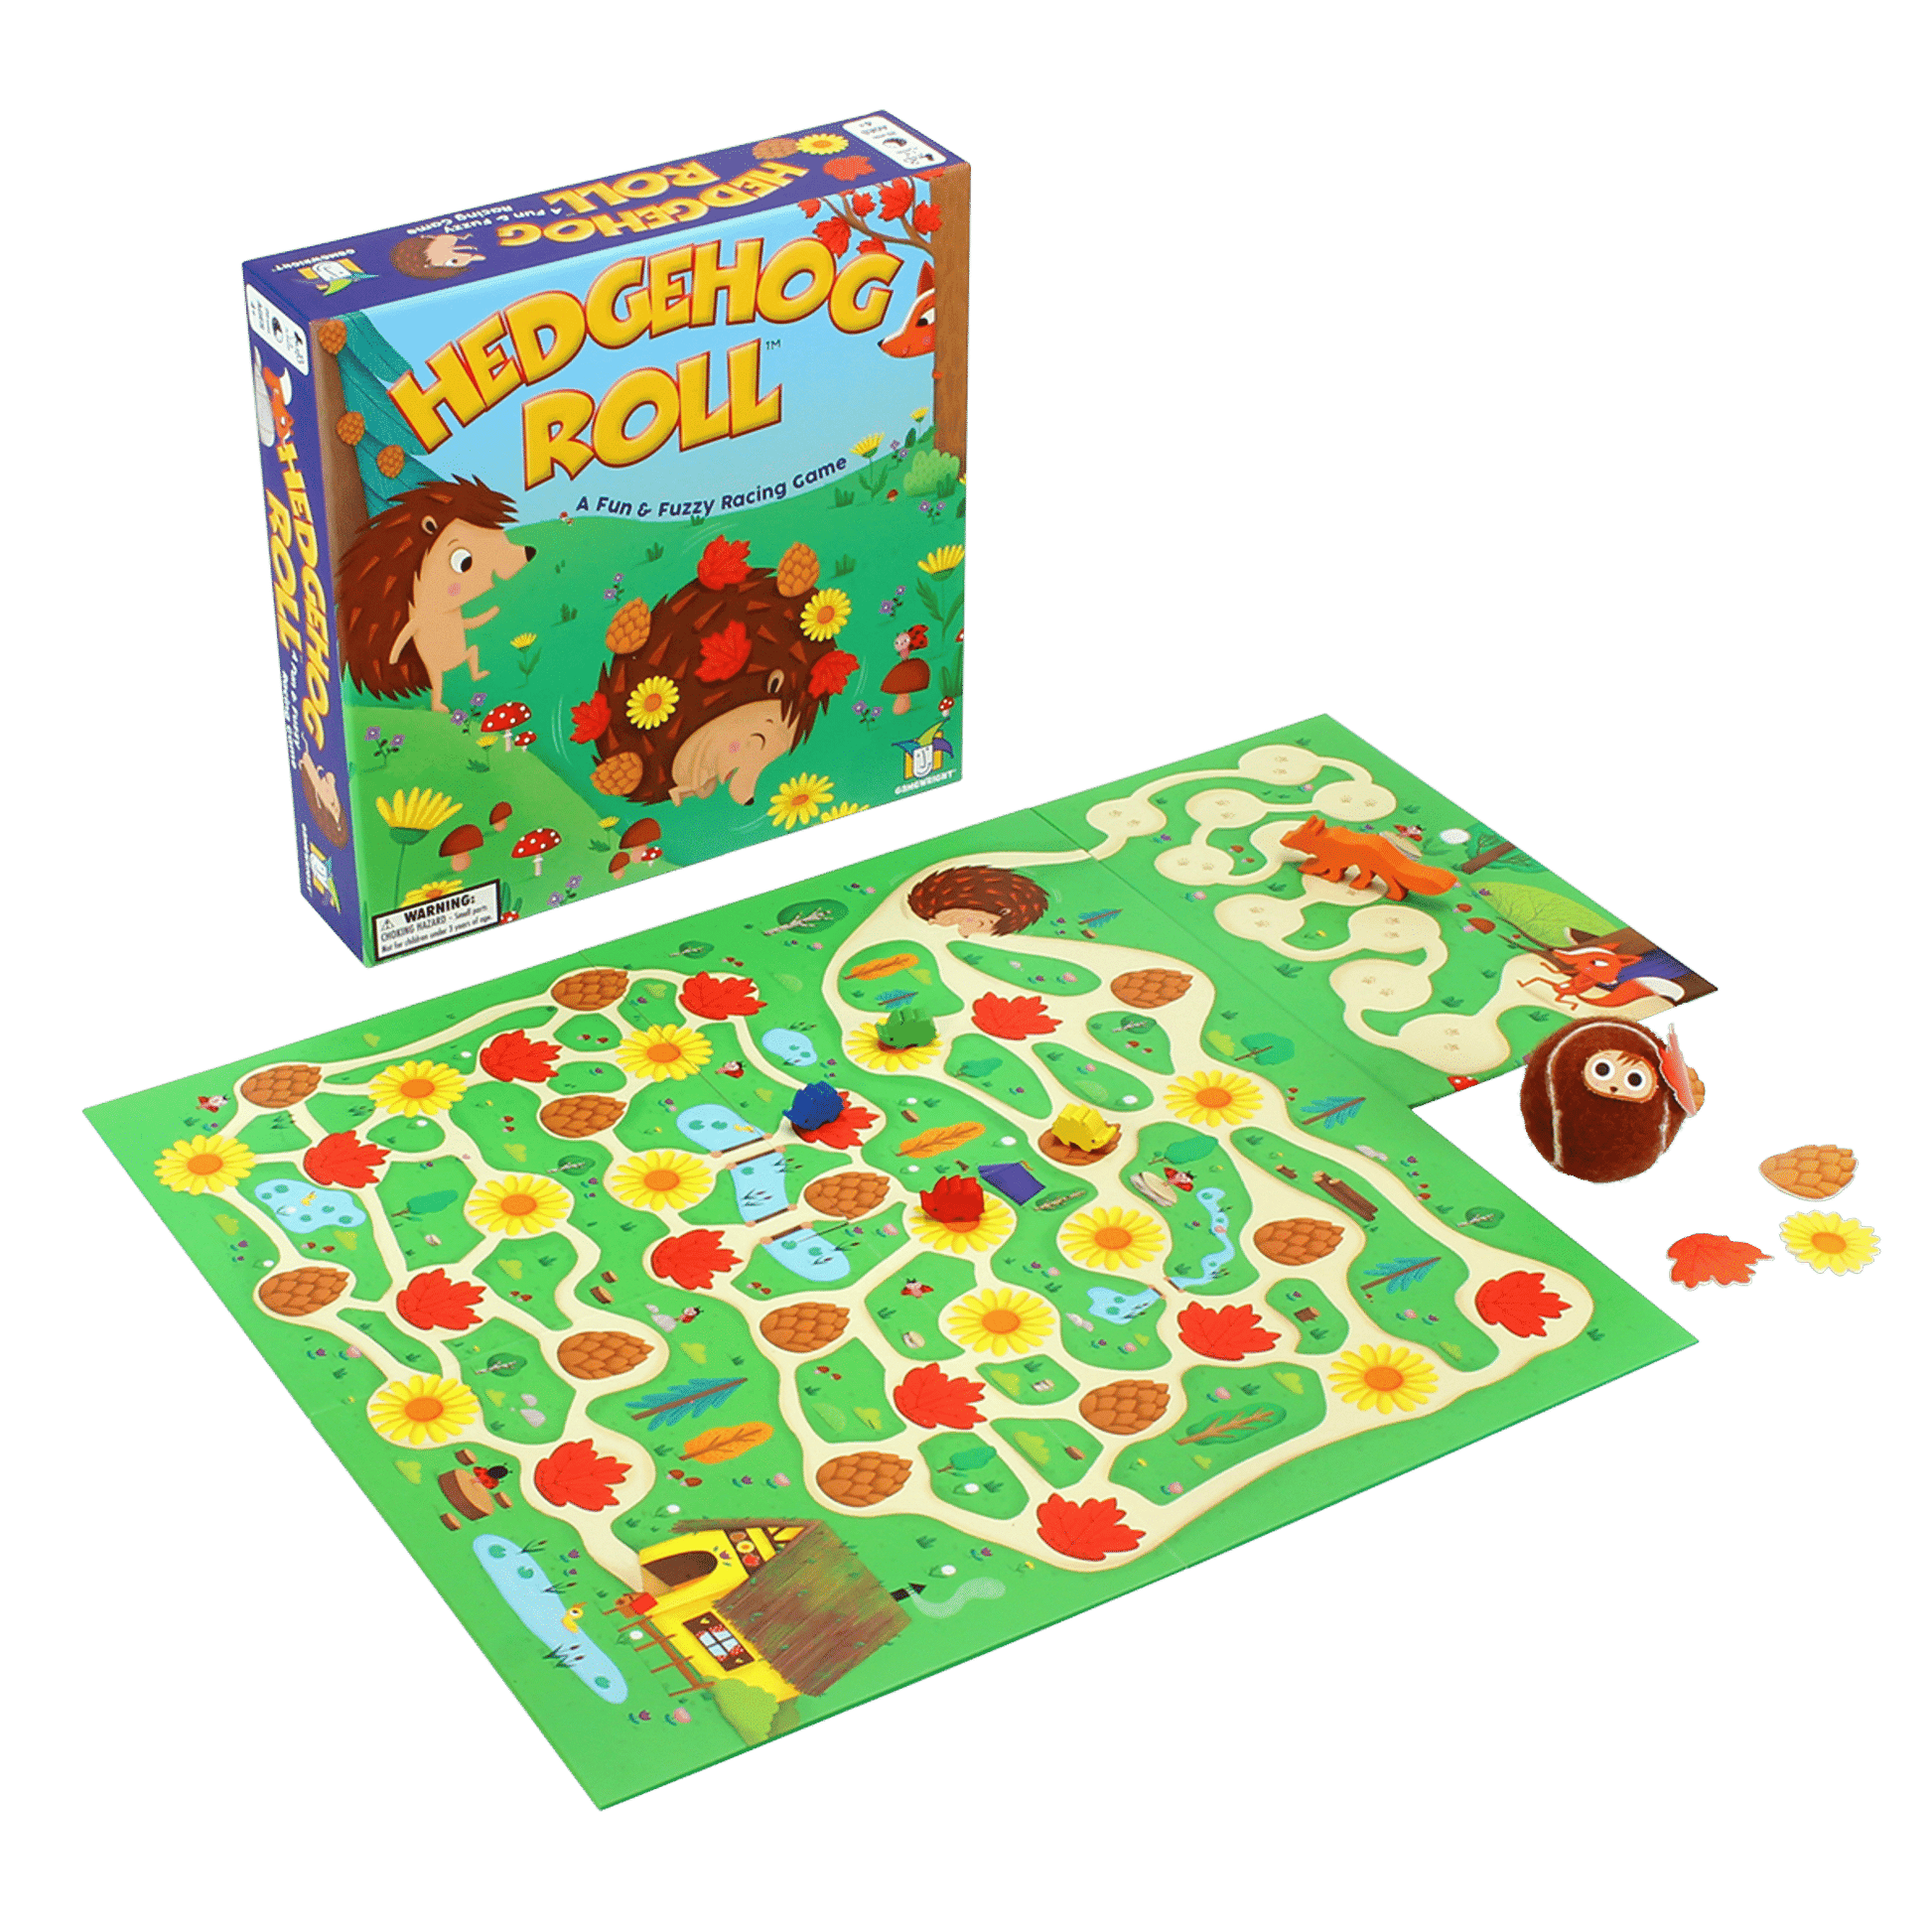 Hedgehog Roll A Fun and Fuzzy Racing Game - Shelburne Country Store